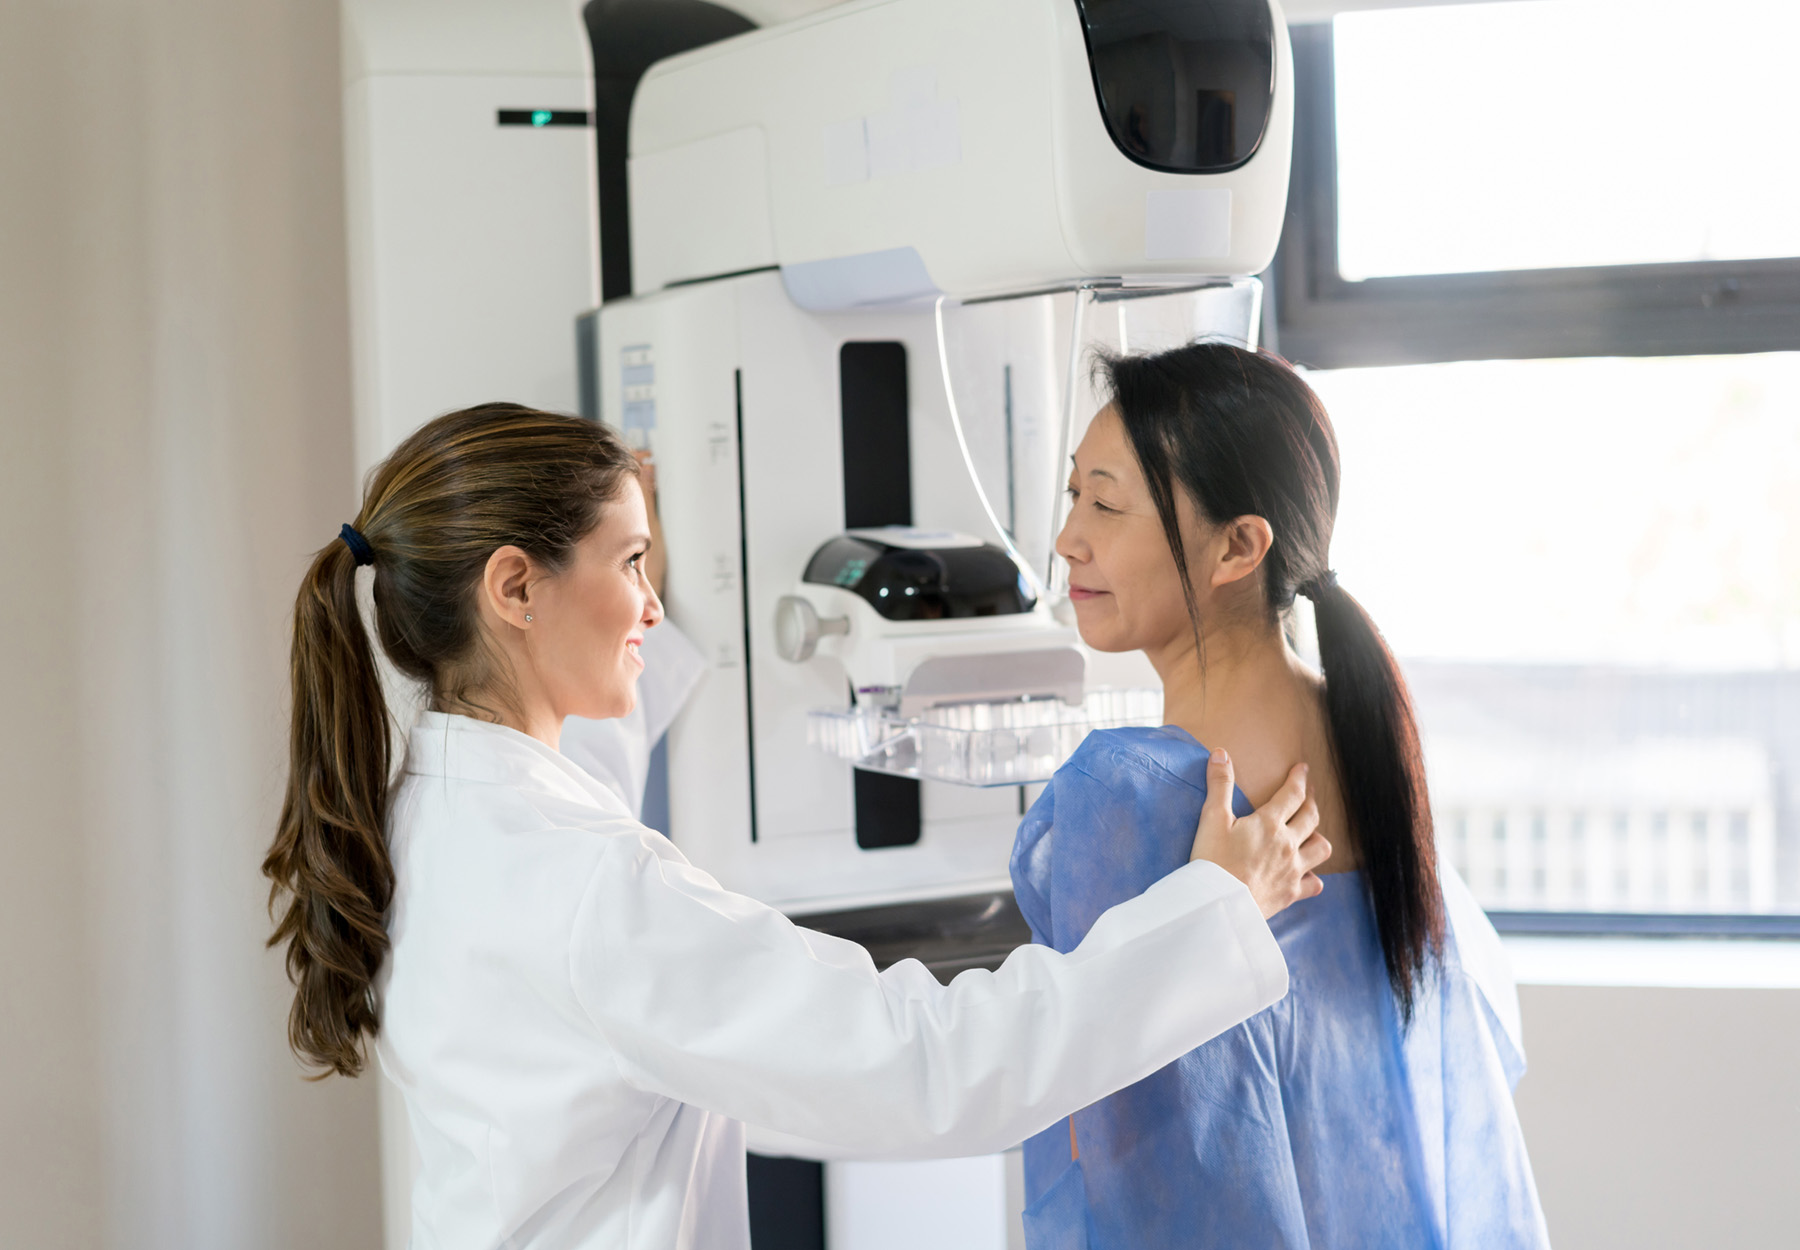 Friendly female doctor talking to her patient and adjusting her position to do a mammogram at the clinic. Stock photo.